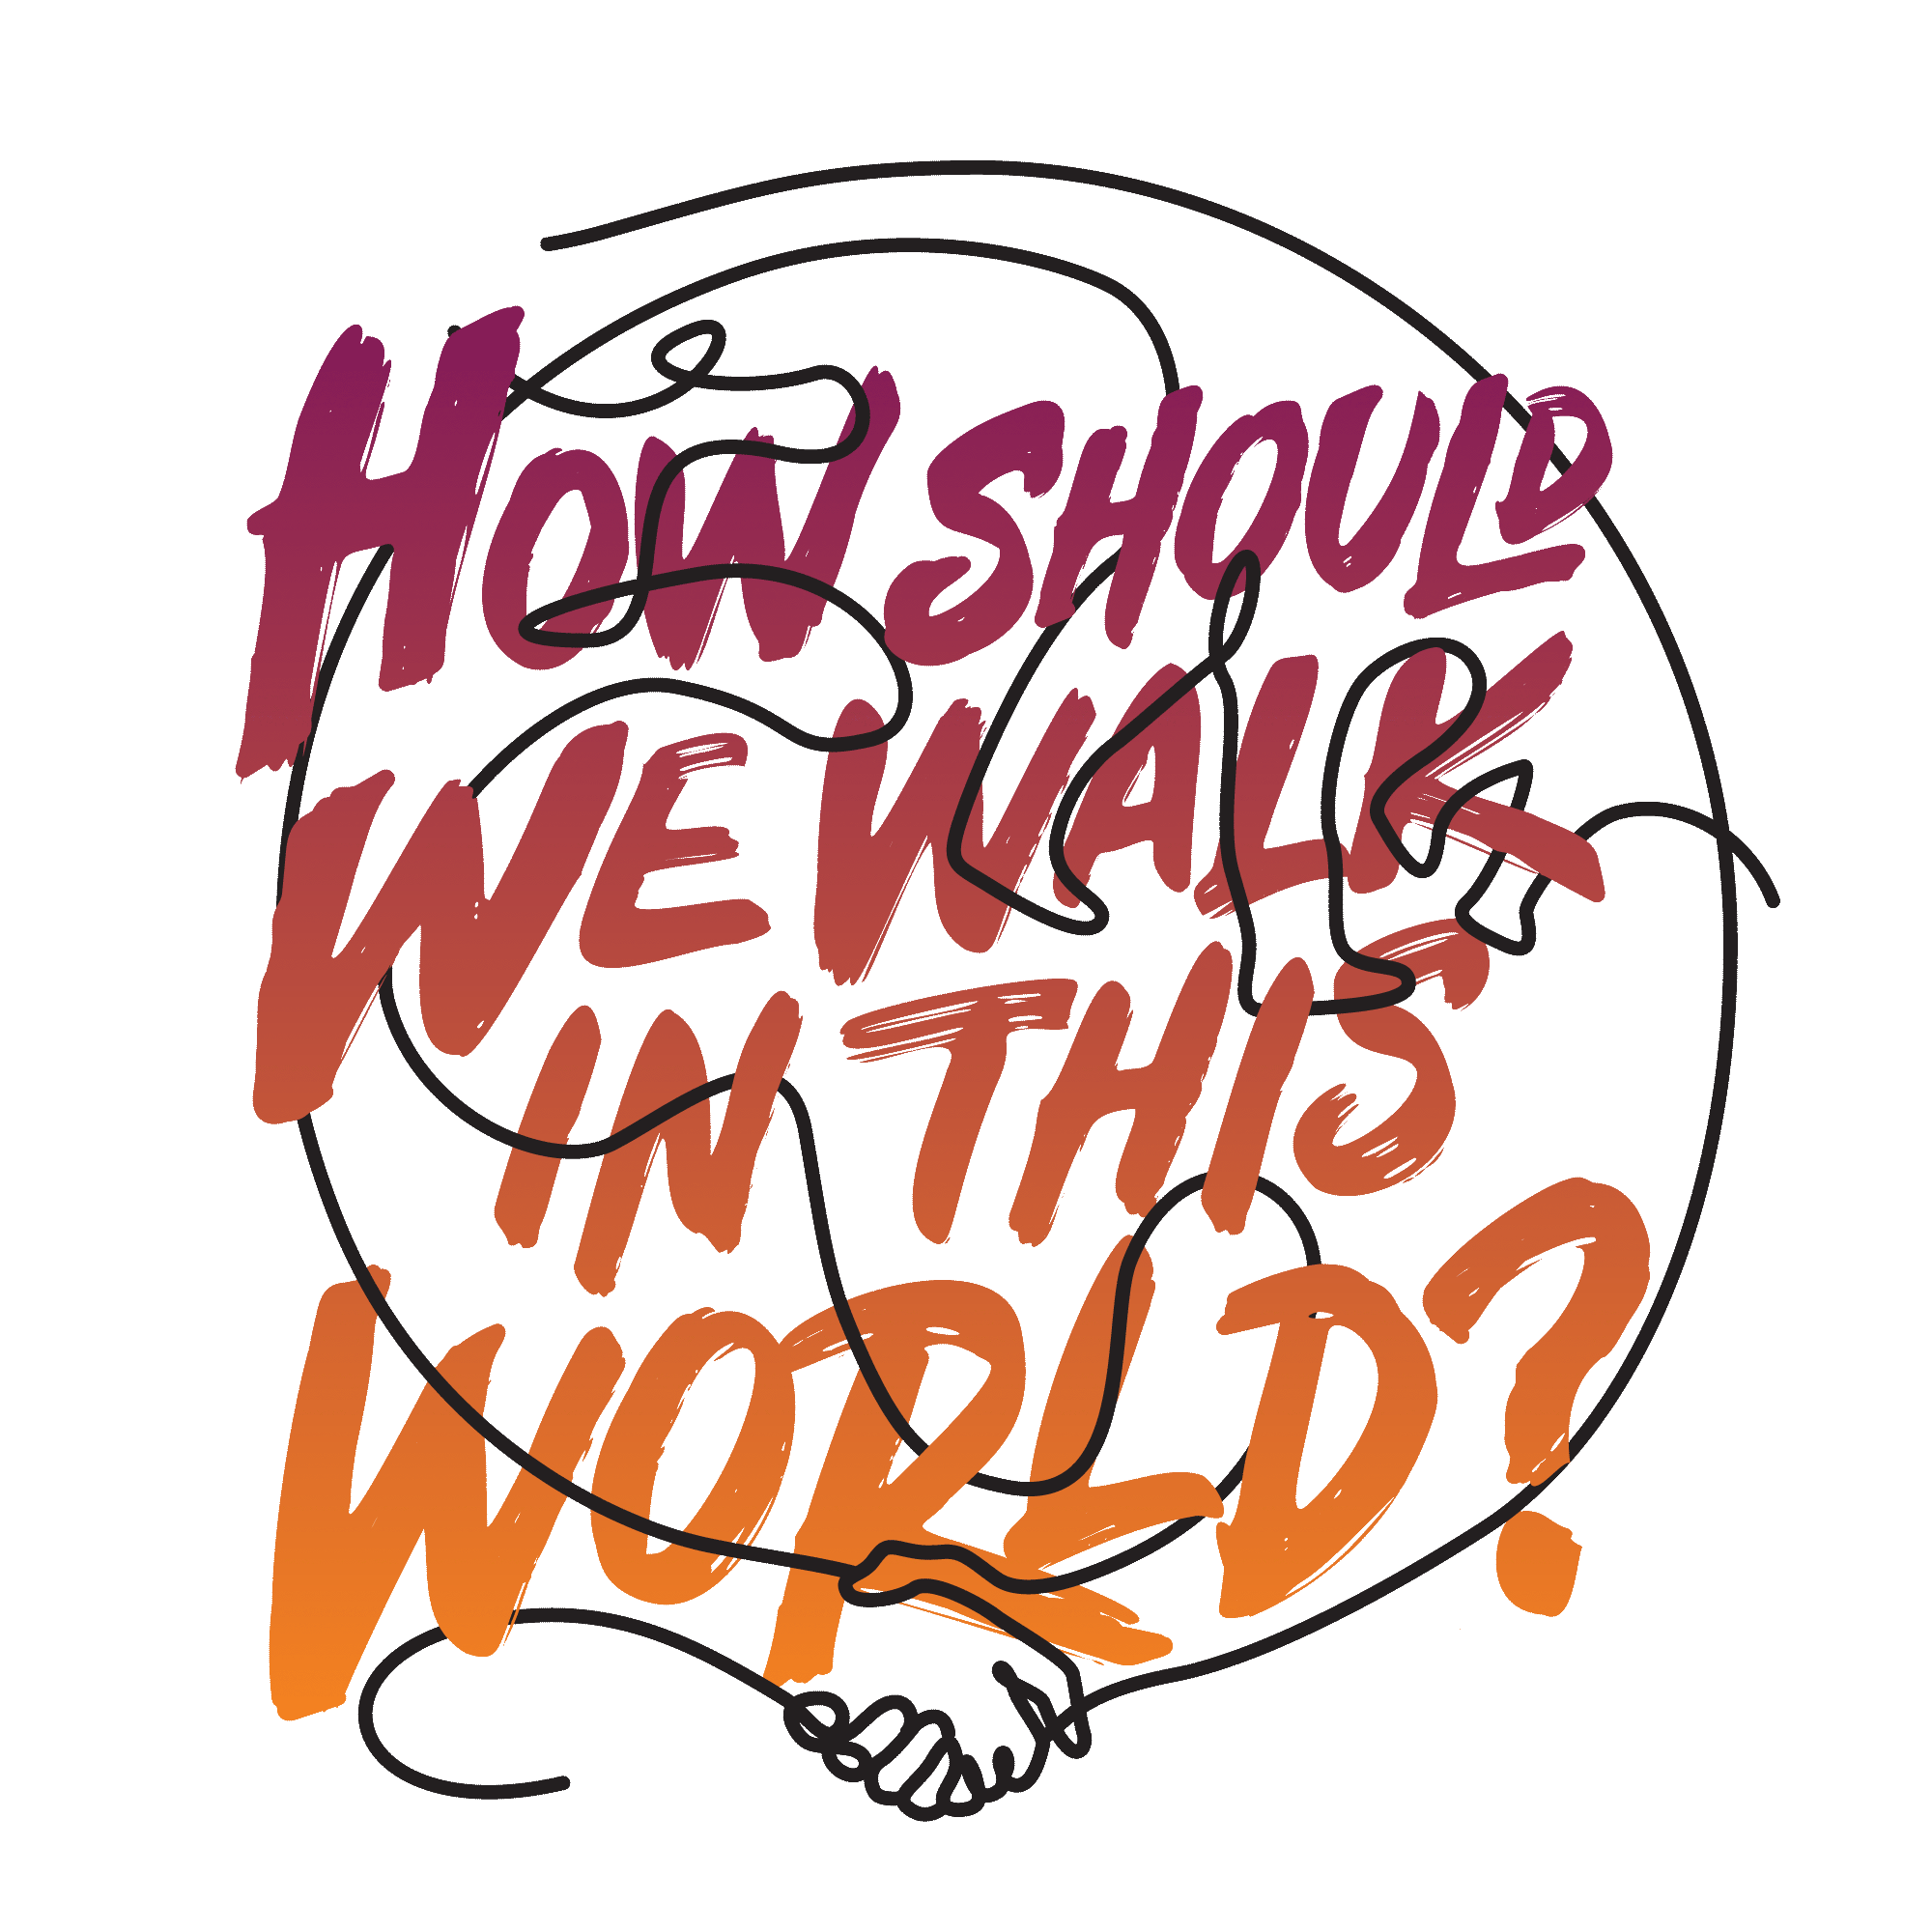 Favorly quote illustration for "How Should We Walk in This World"